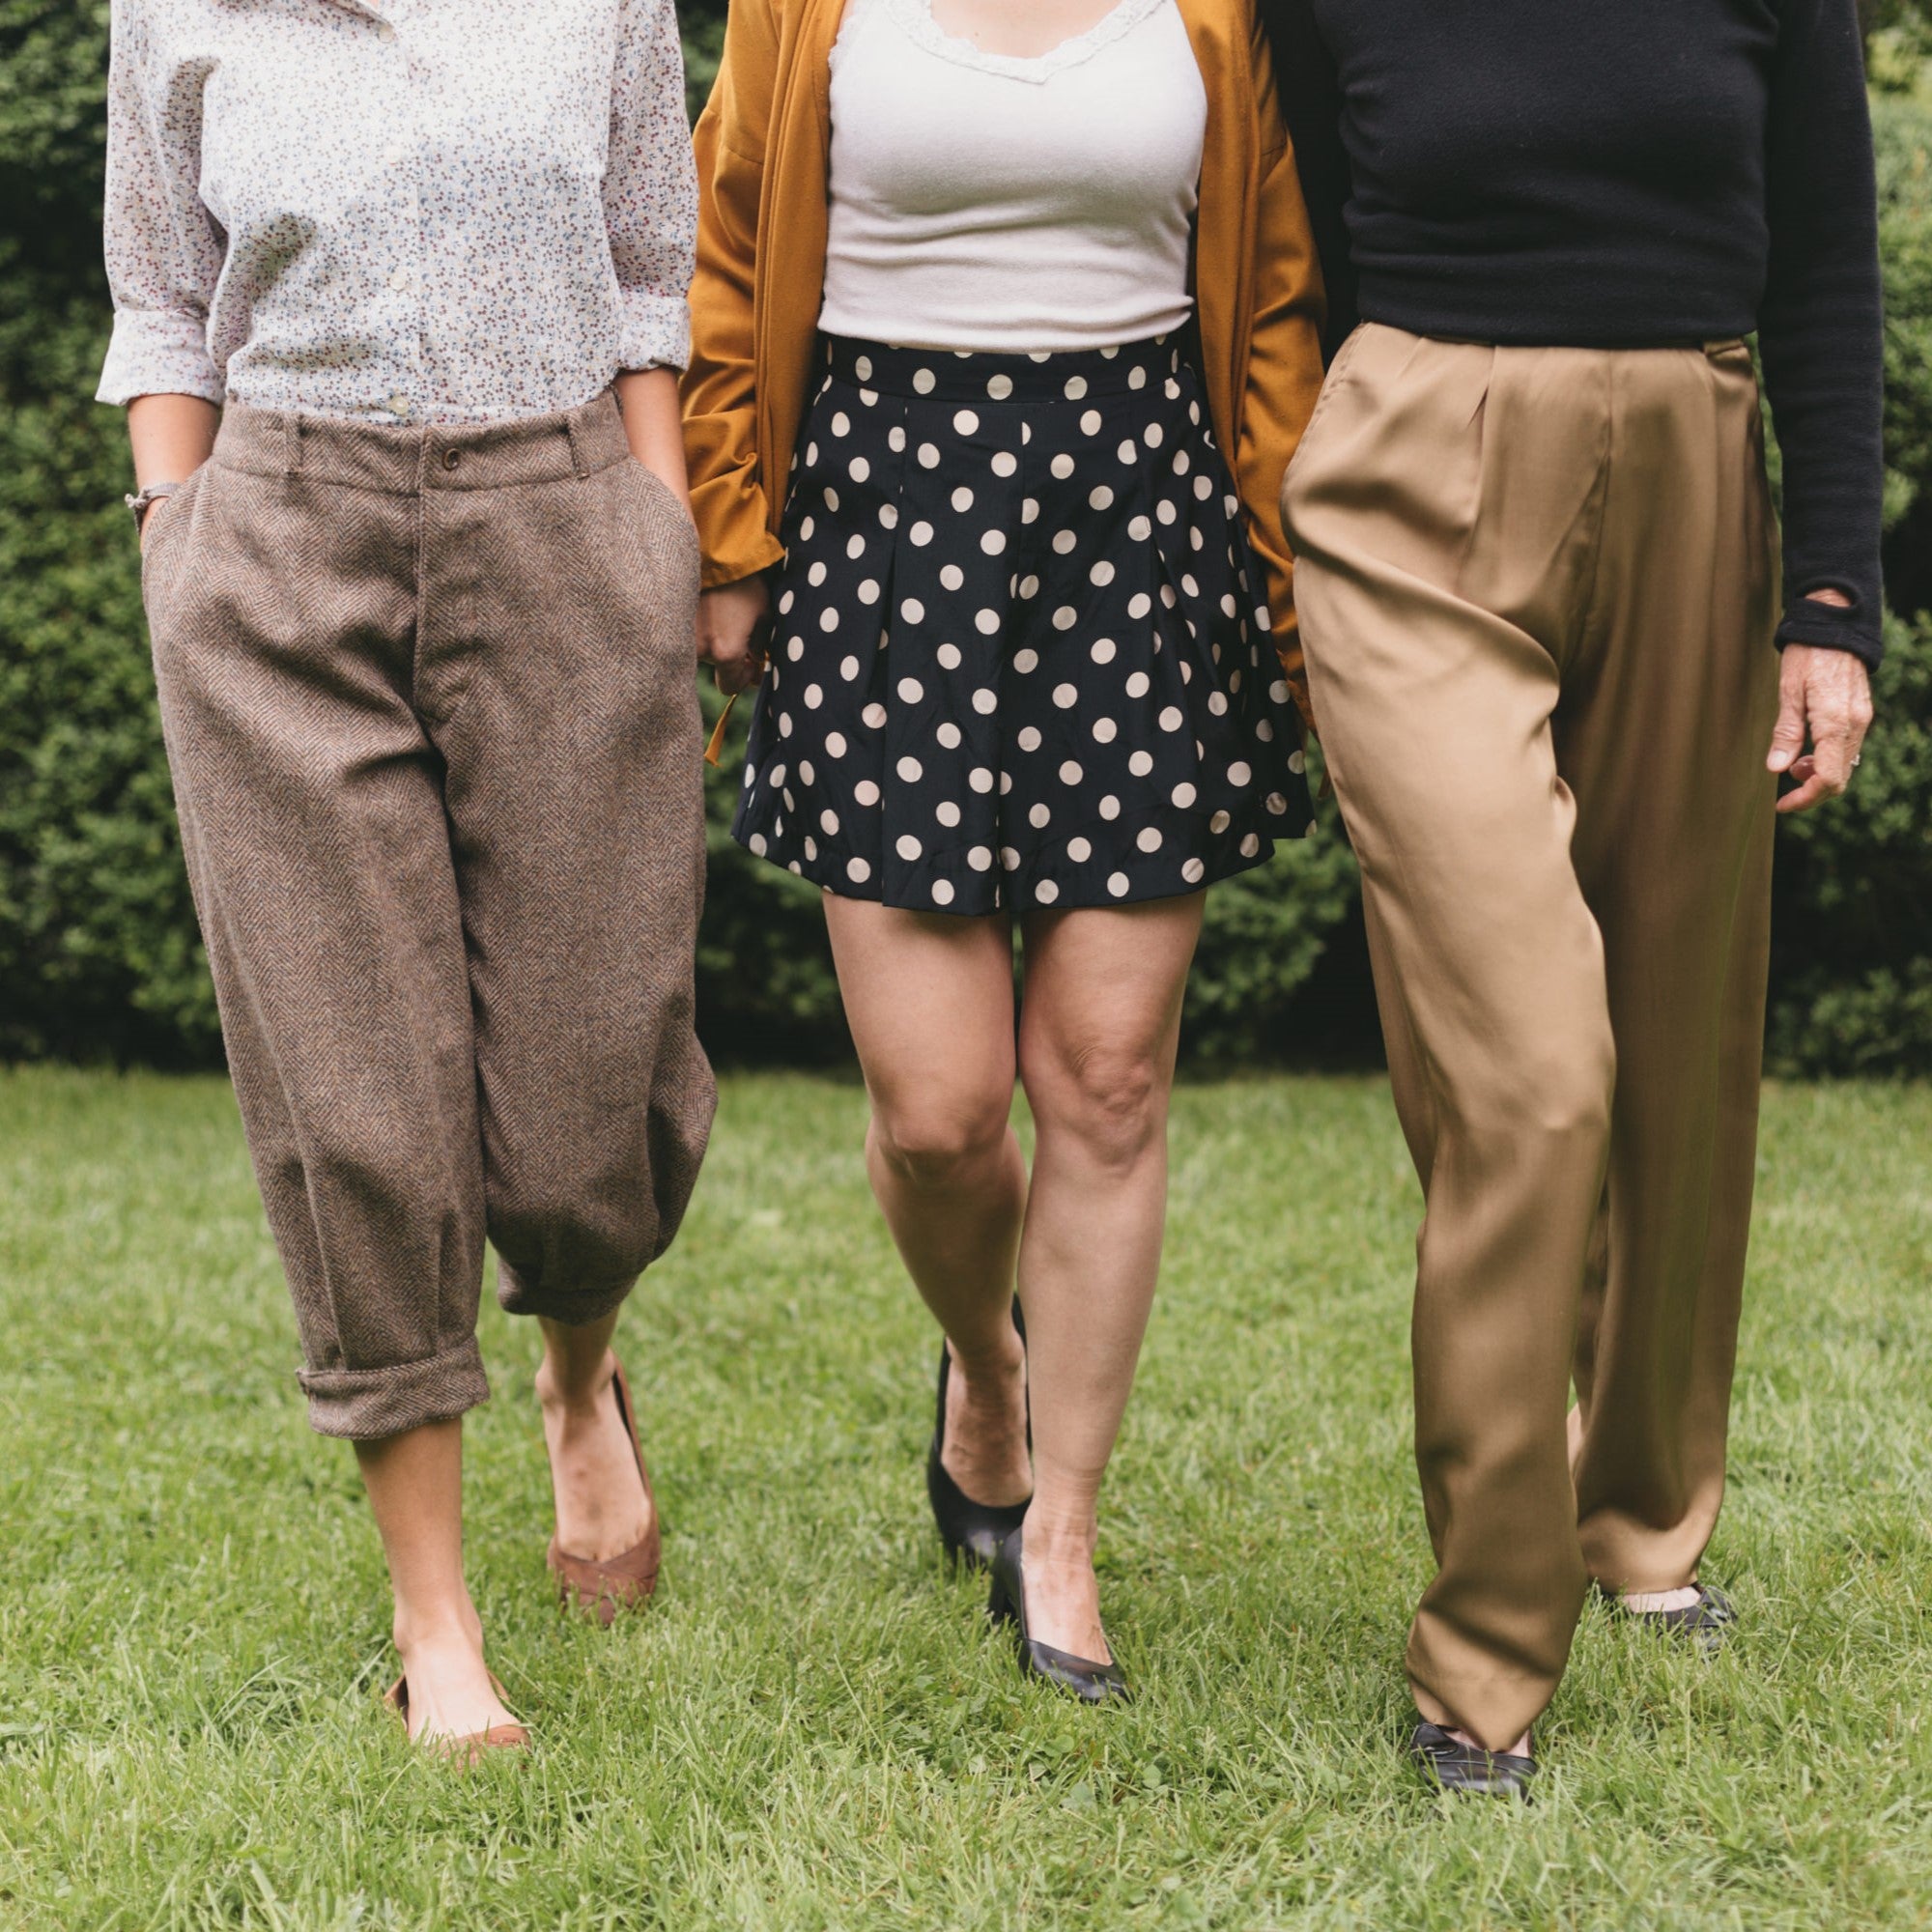 Legs of three women walking in Hollywood Pants (shorts, and knickers).